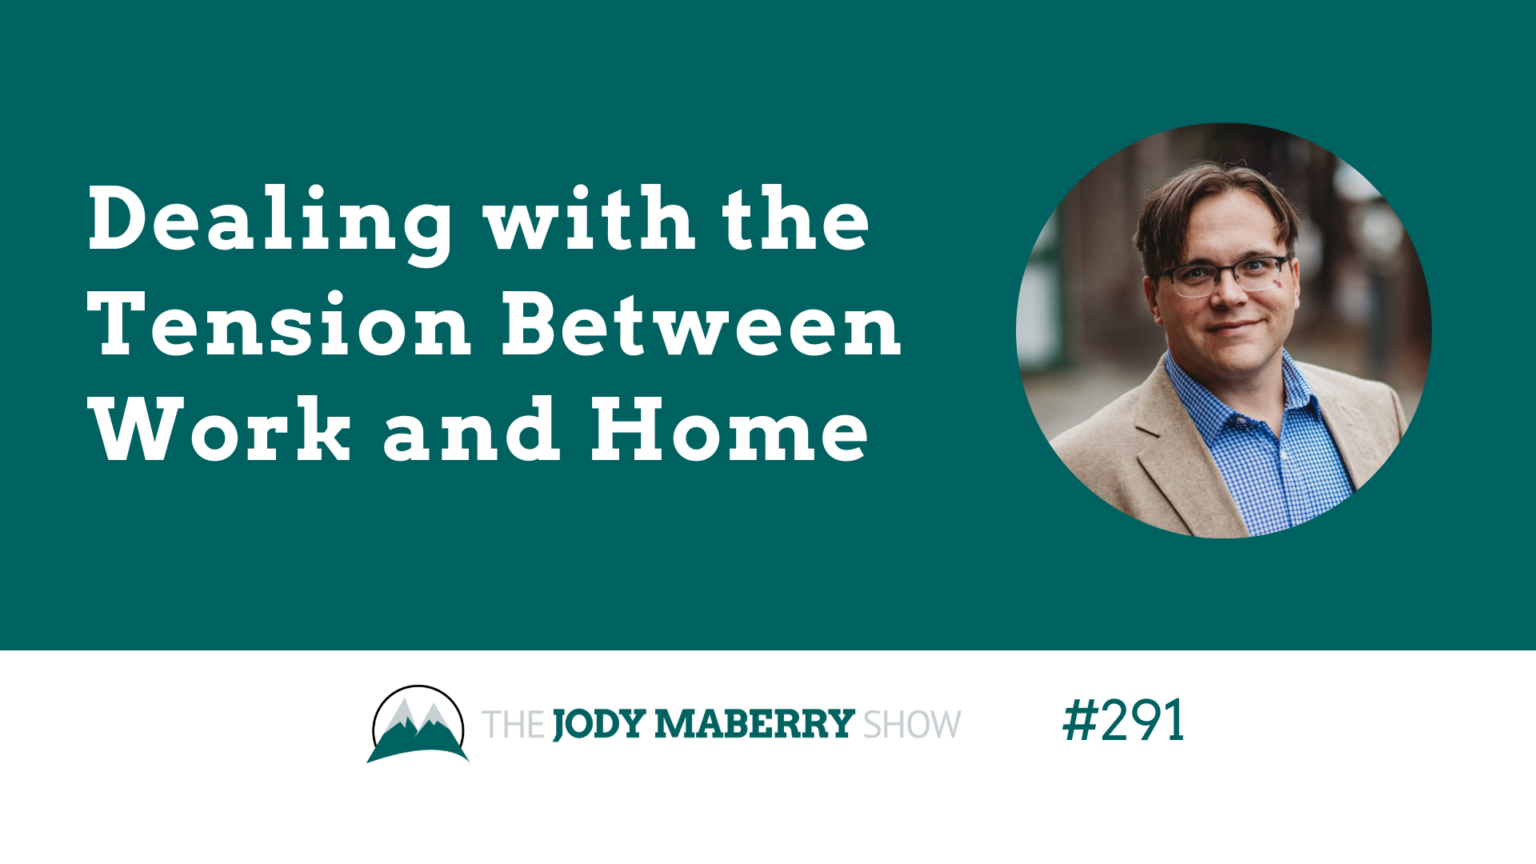 Jody Maberry Show Episode 291 Dealing with Tension Between Work and Home